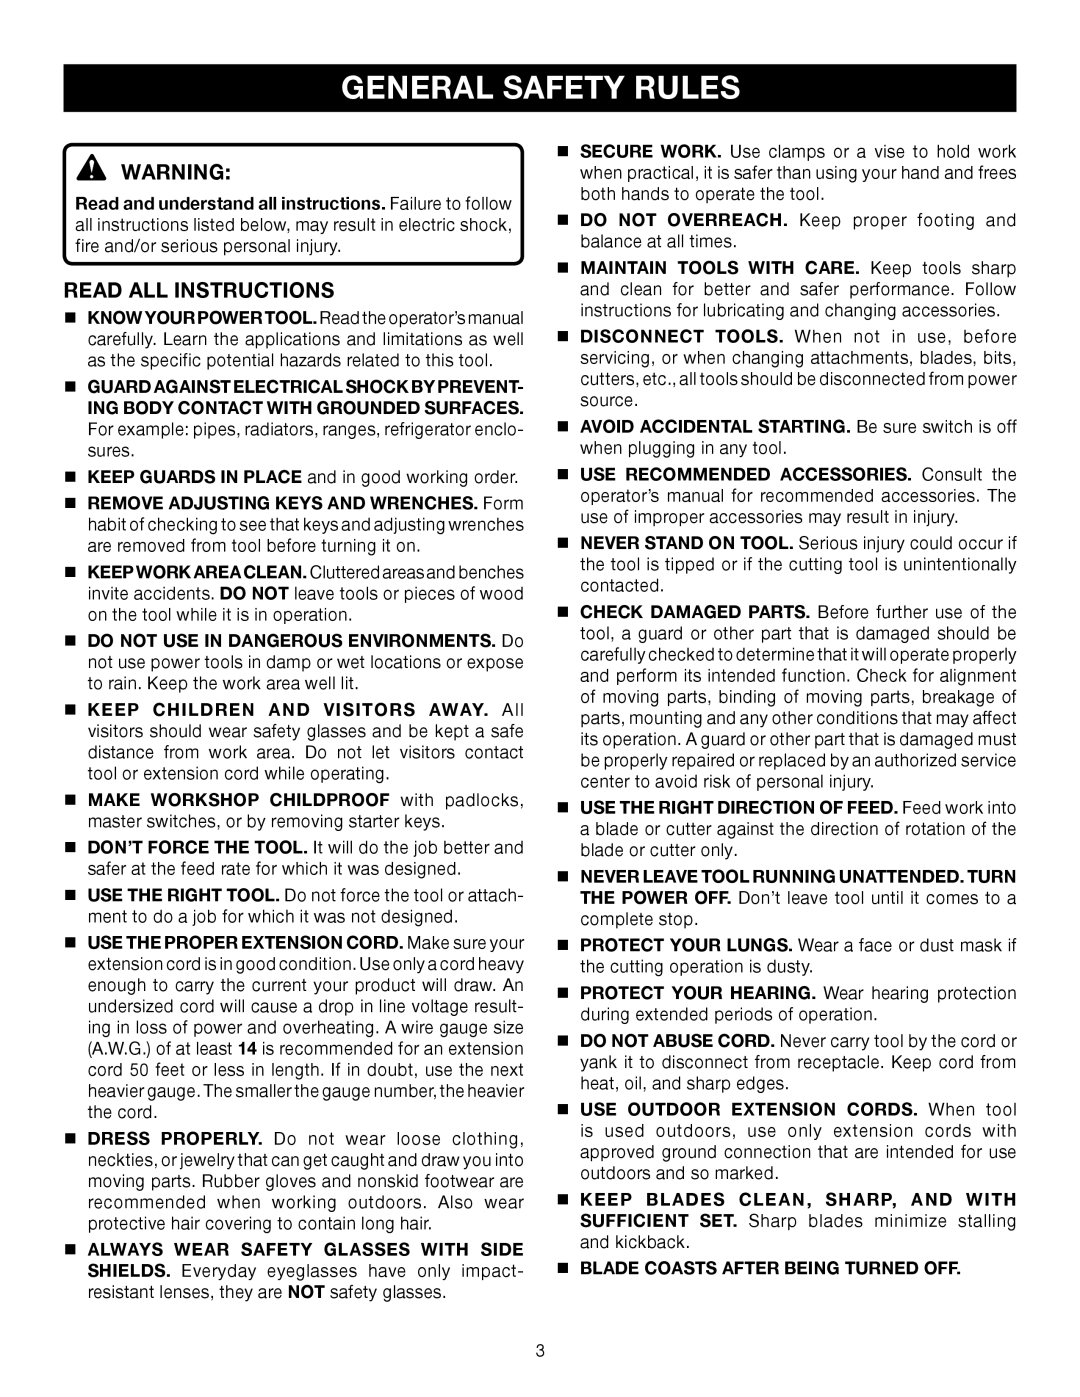 Ryobi TS1141 manual General Safety Rules, Read All Instructions 